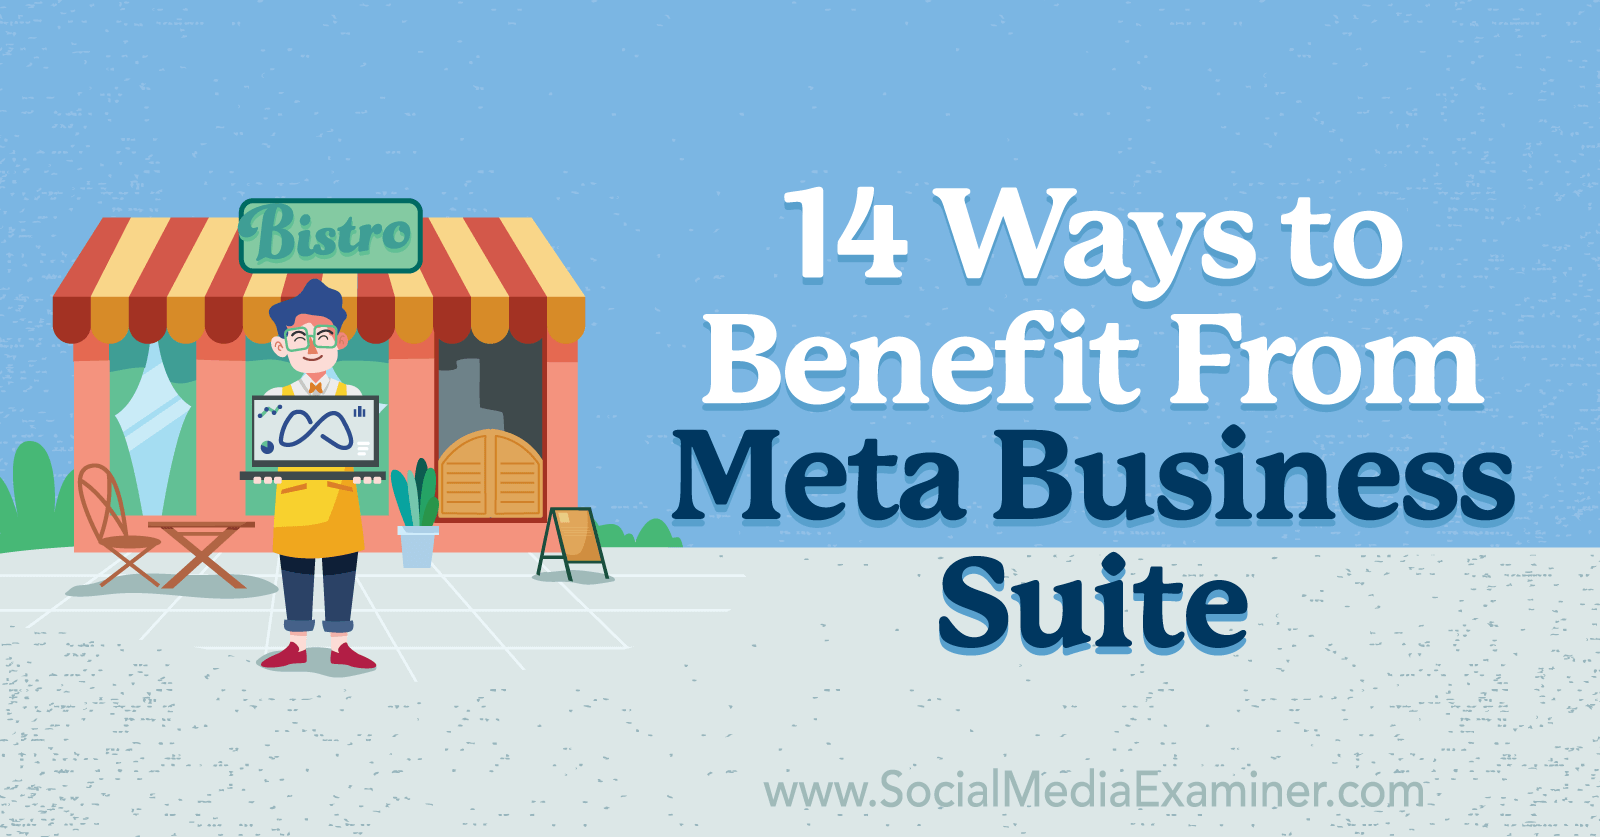 14 Ways to Benefit From Meta Business Suite